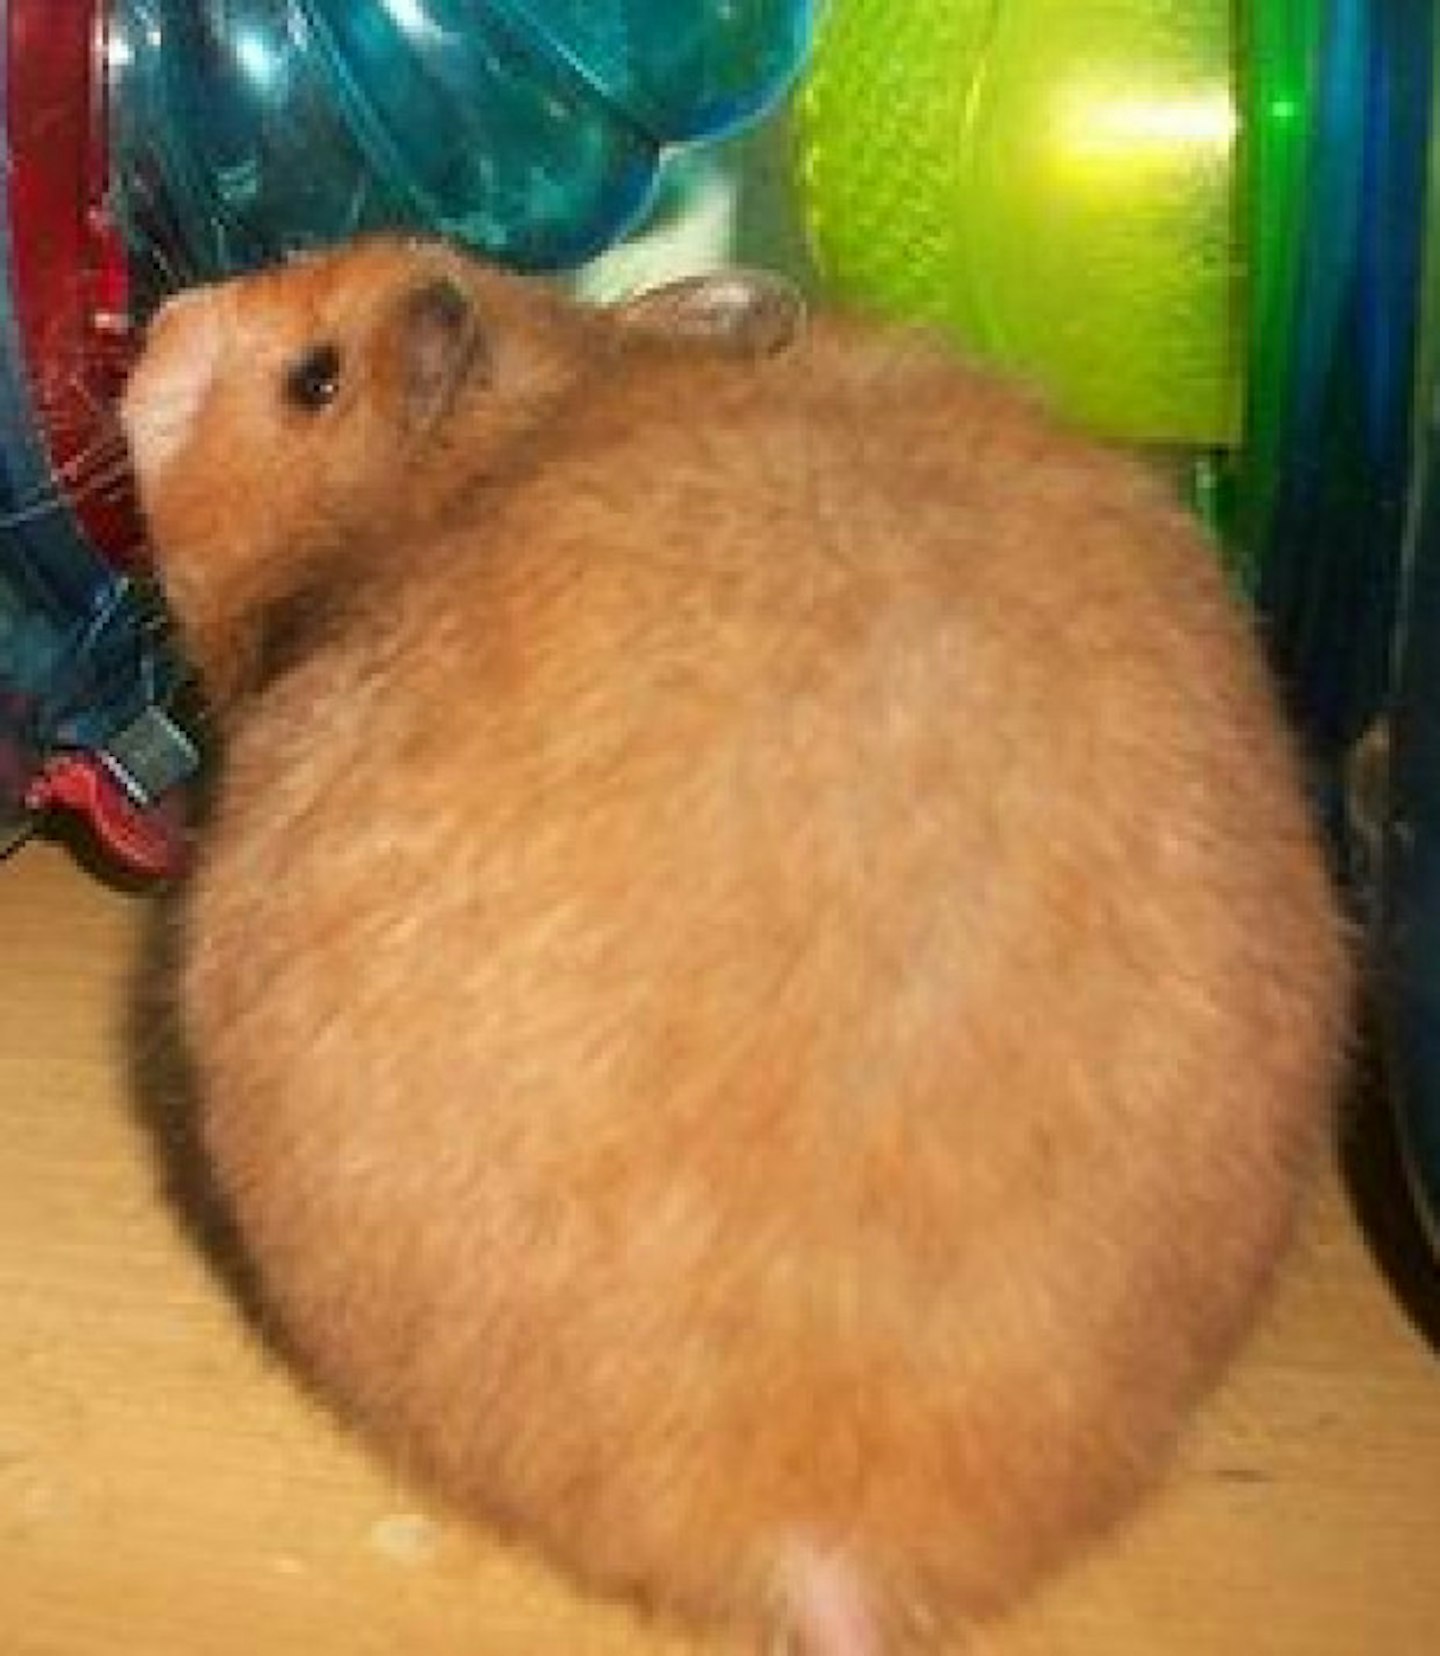 This hamster's bum...